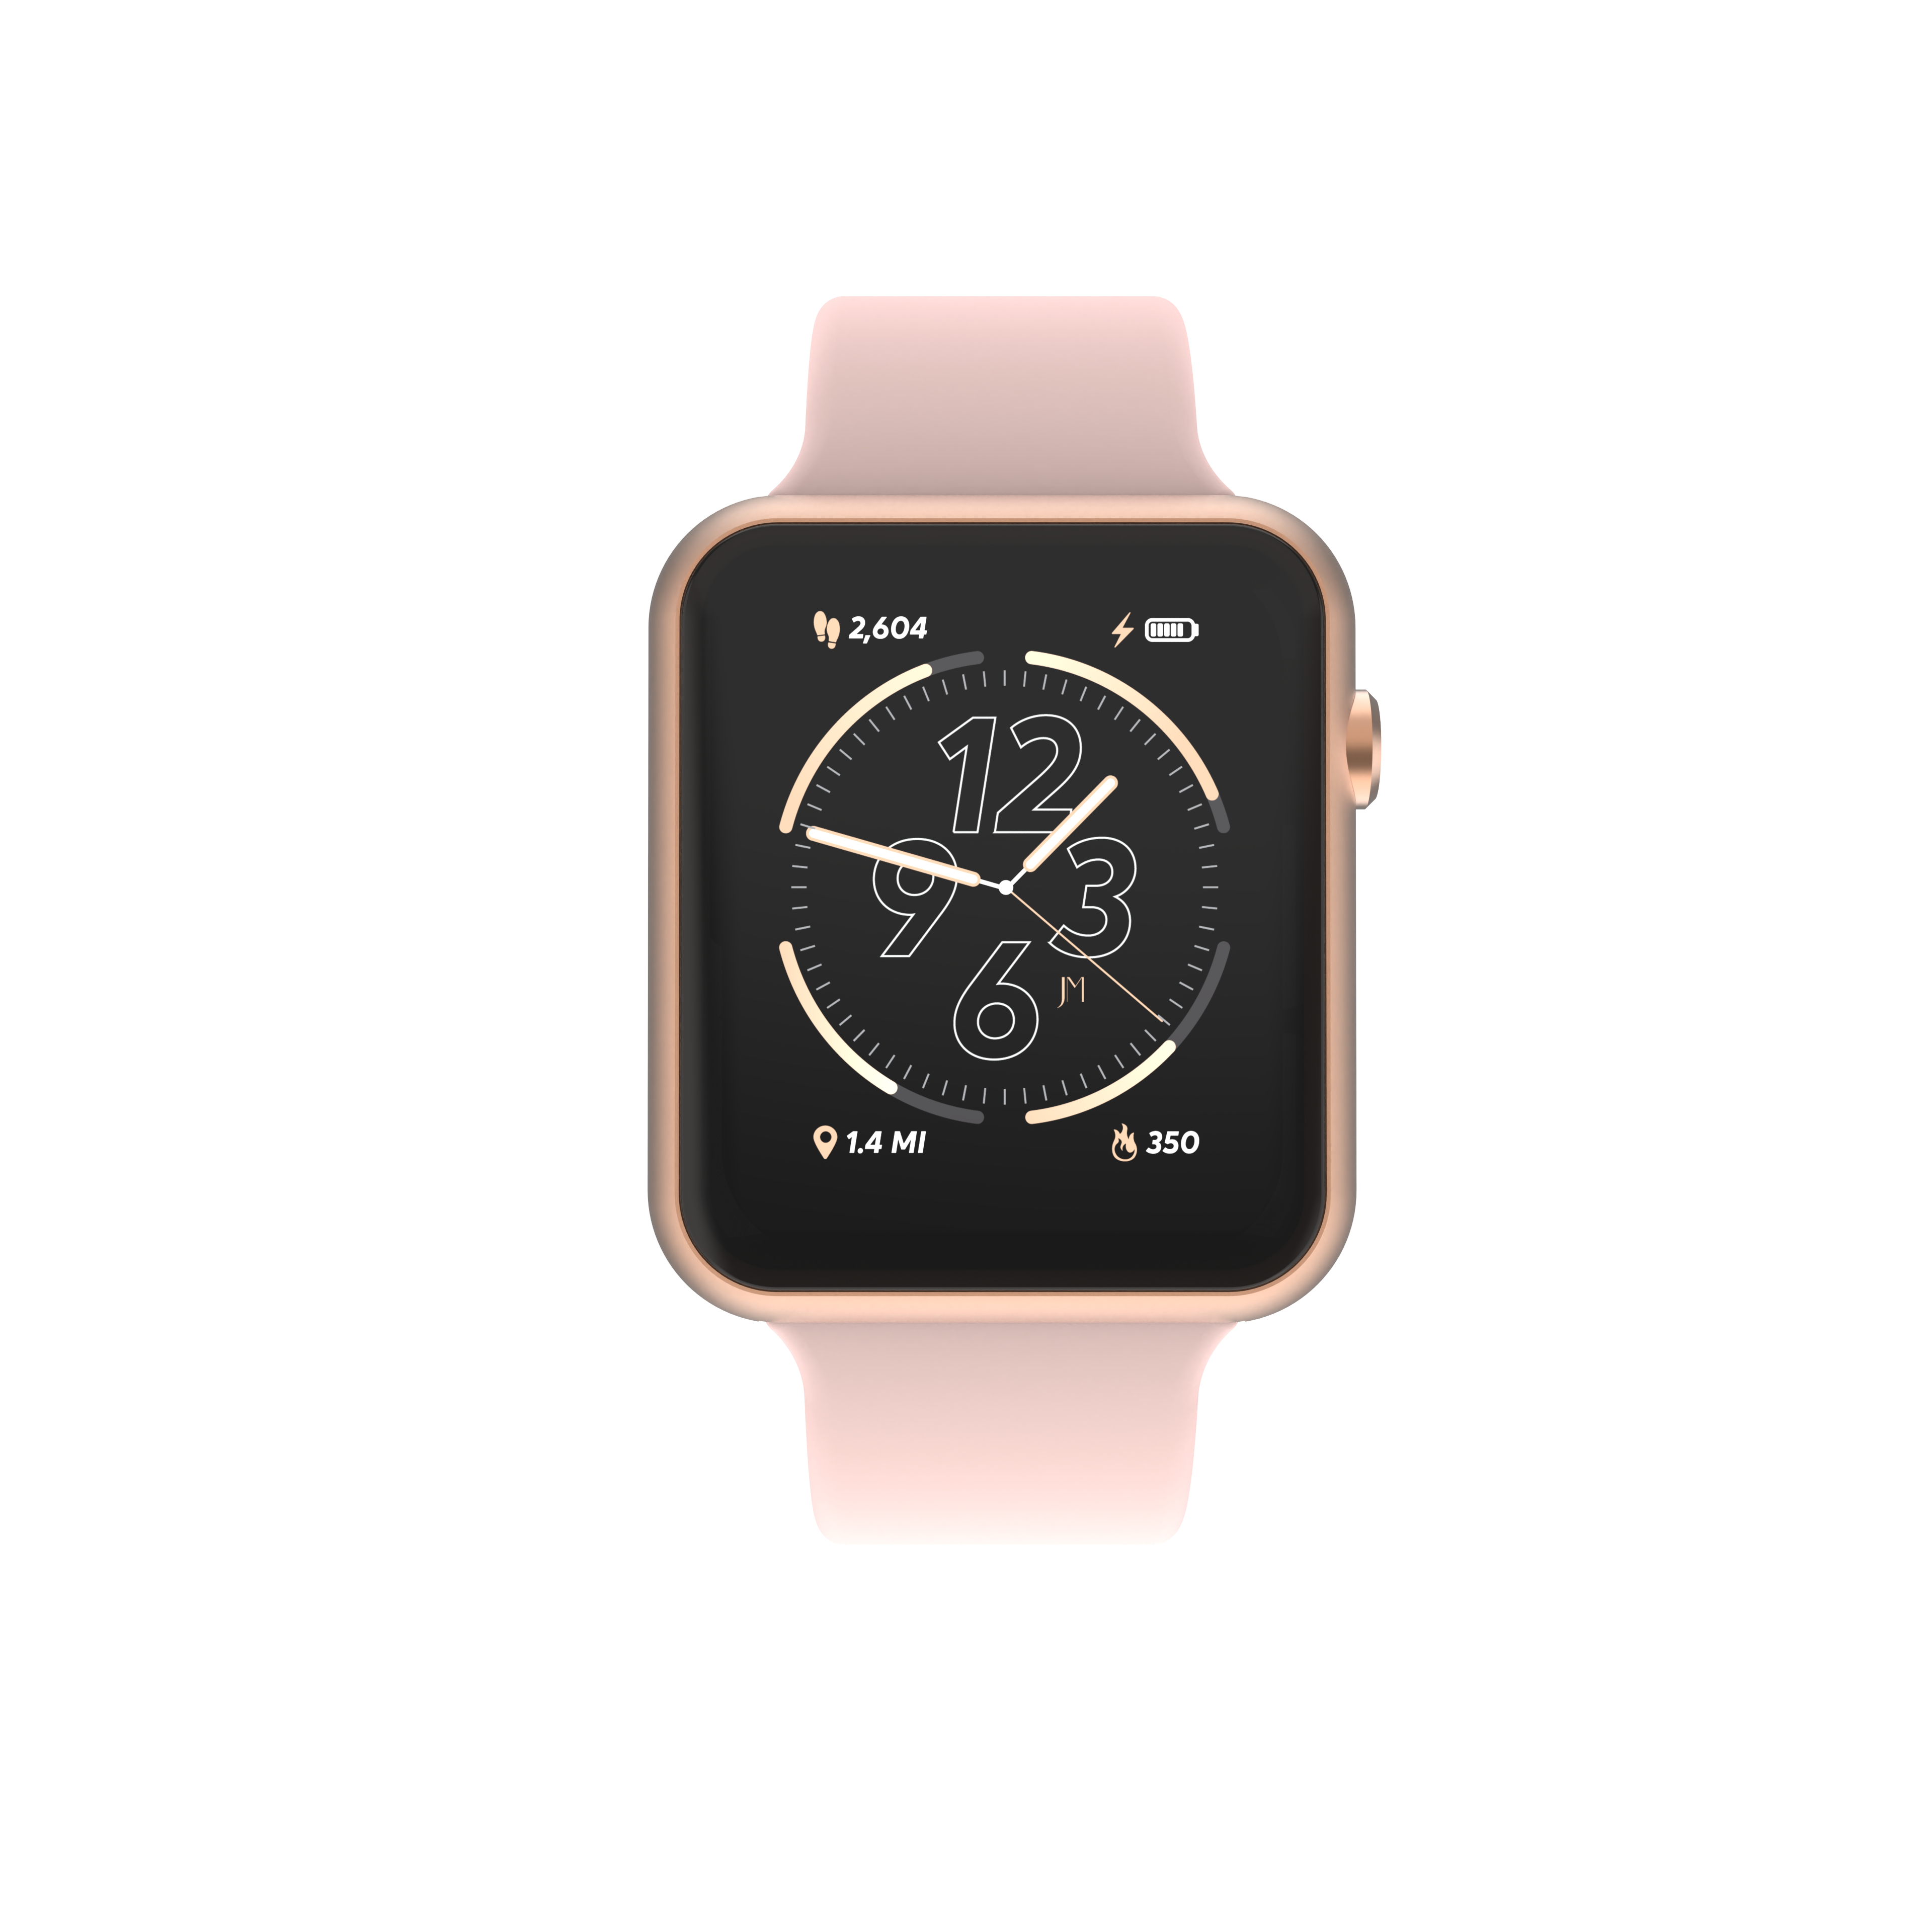 iTouch Air 4 | Jillian Michaels Edition Smartwatch in Rose Gold with Blush Strap